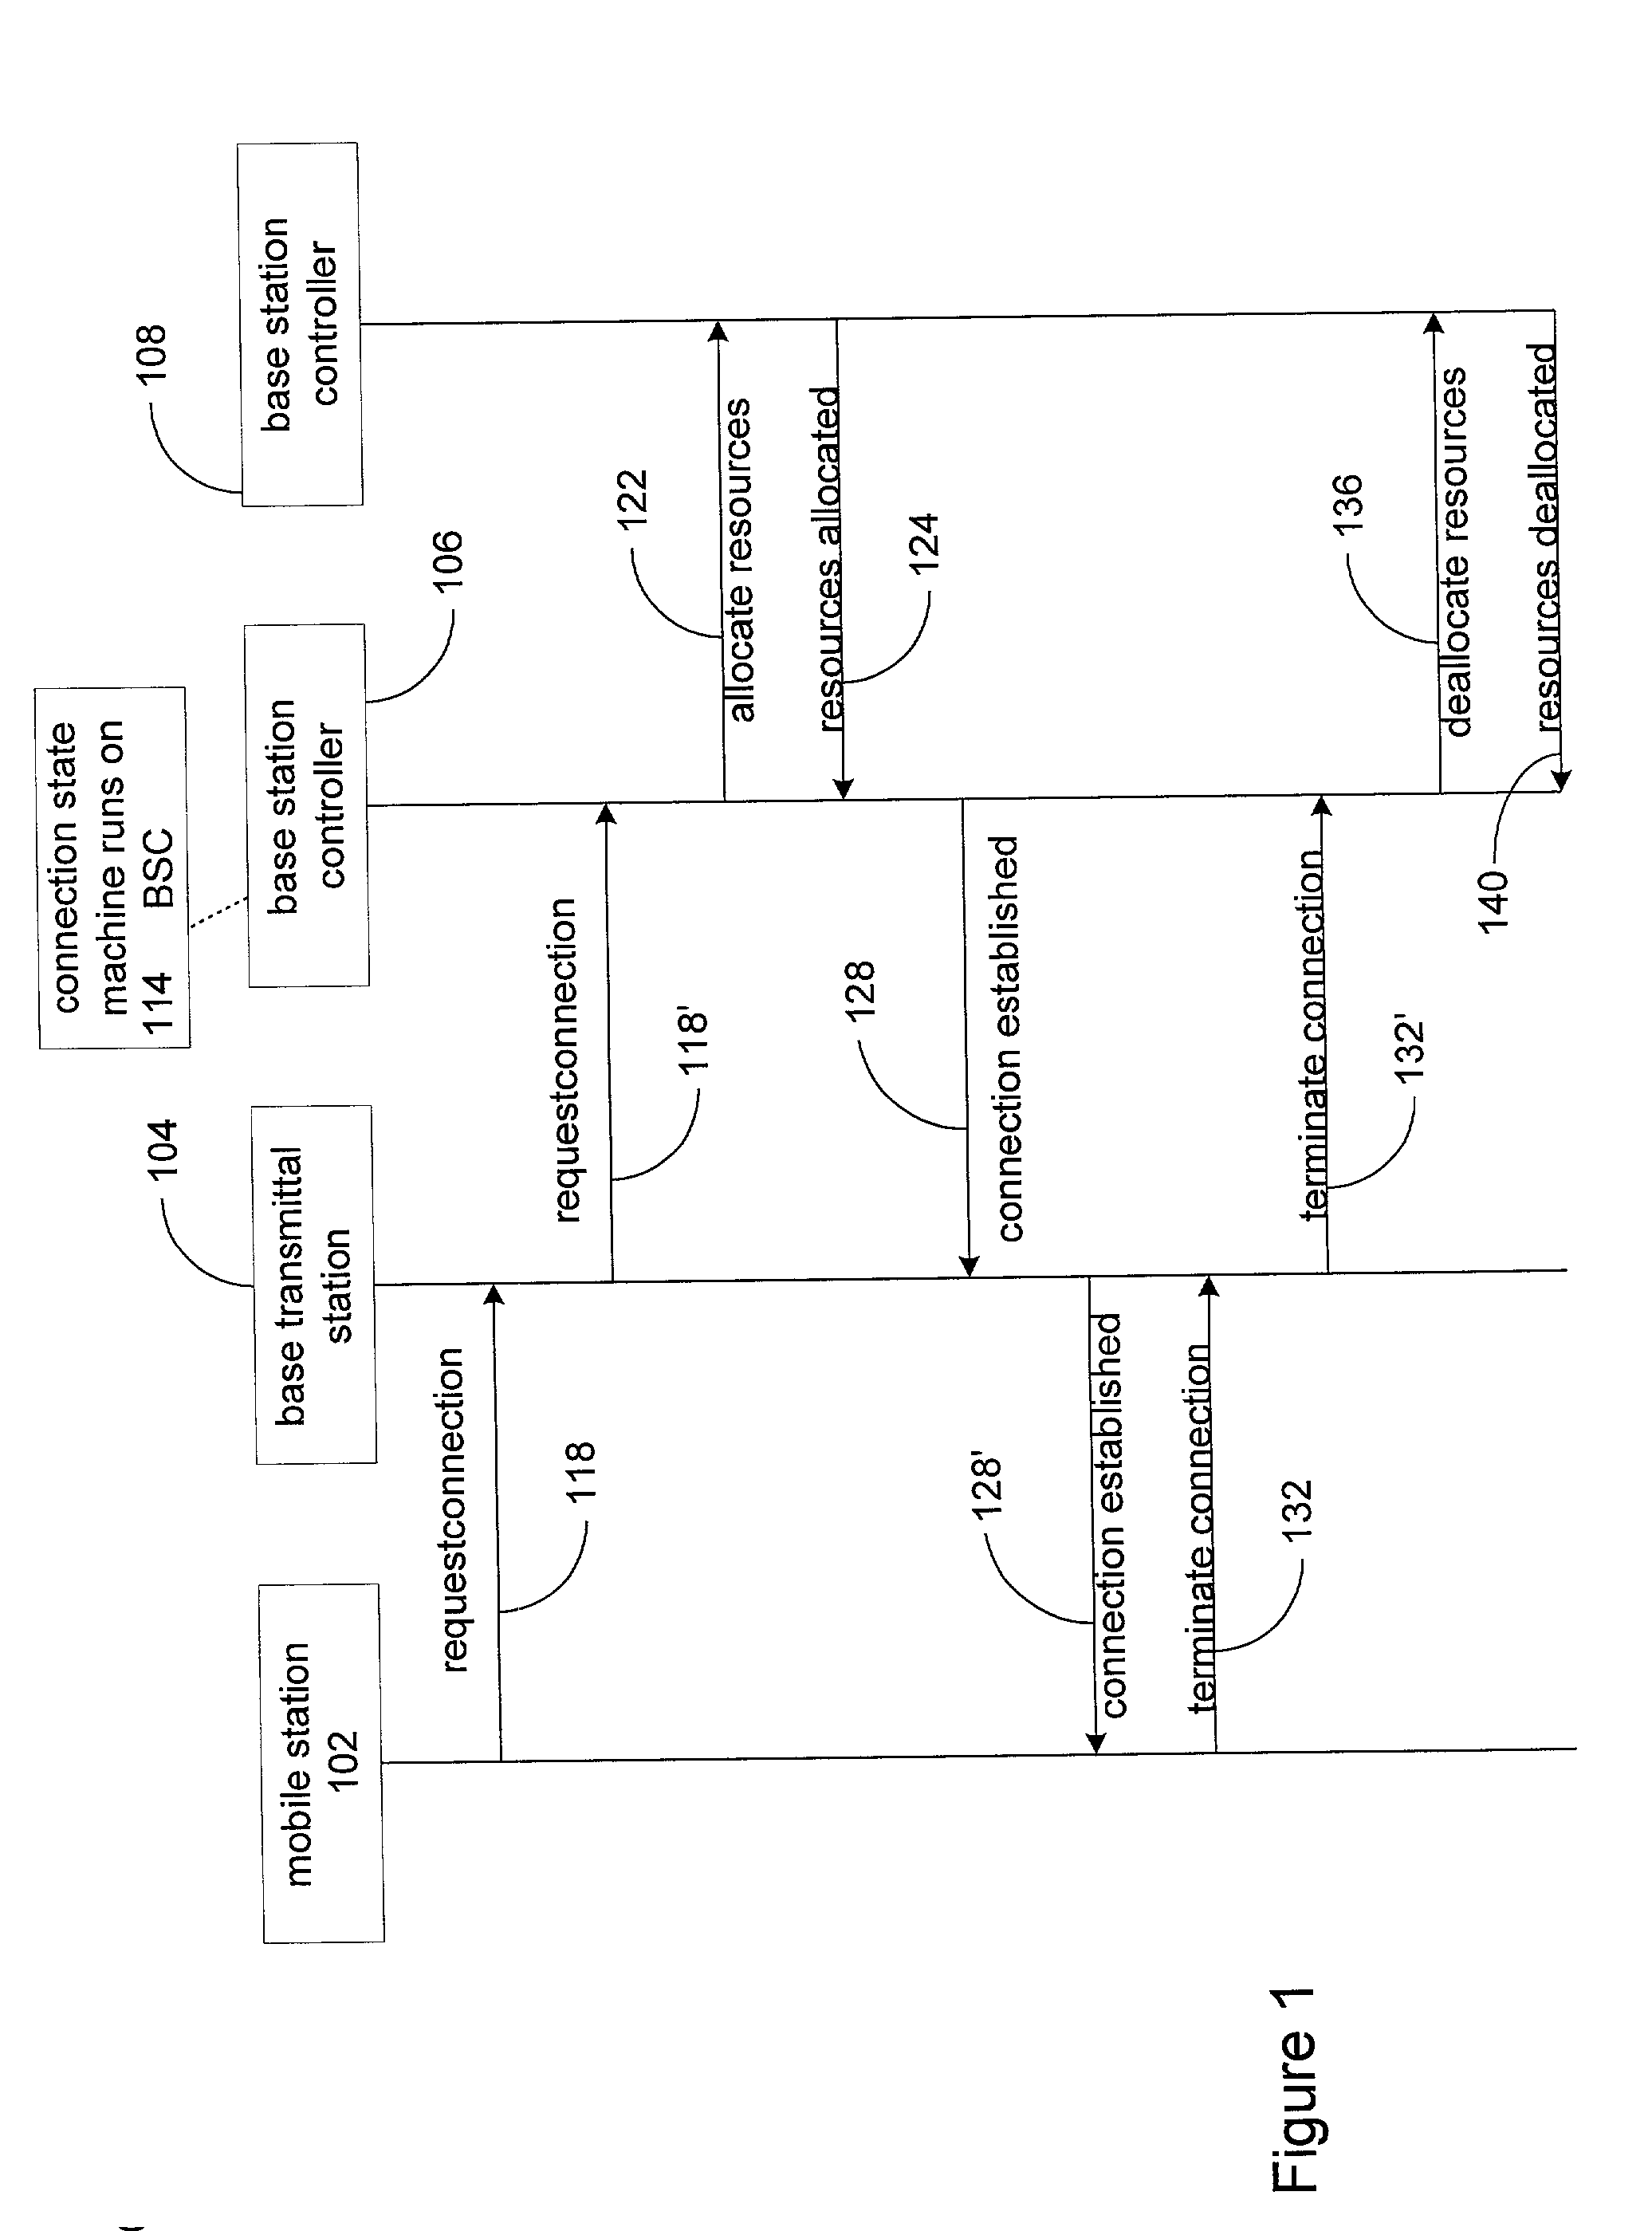 Method and apparatus for implementing state machines as enterprise javabean components